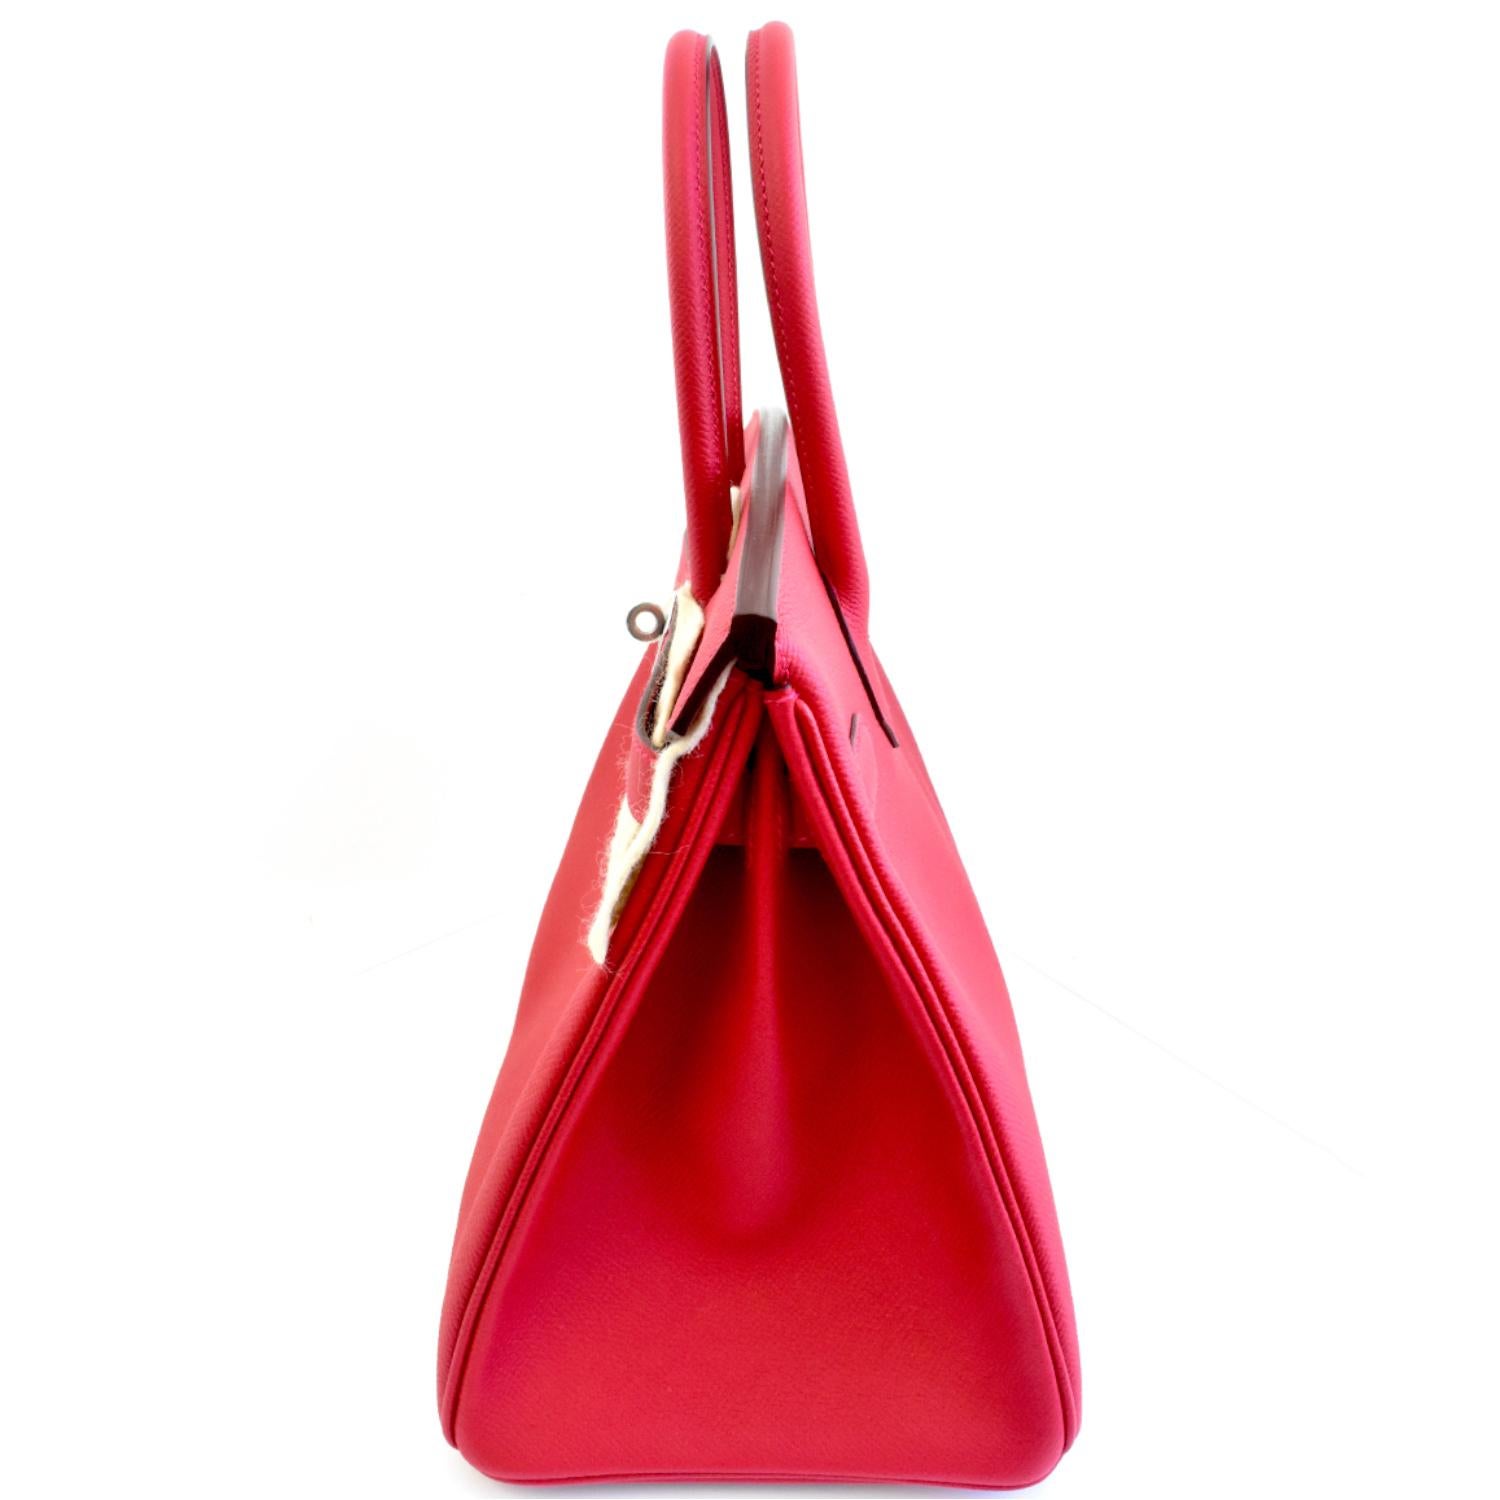 Designer: Hermes

Color: Rouge Casaque

Material: Epsom Leather

Width:  30 cm

Height: 21 cm  ( 8.5 inches)

Depth: 15 cm (6 inches)

Strap Drop: 8 inches

Condition: BRAND NEW

Dustbag: Yes

Includes: 24 Month Brilliance Jewels Warranty 

        